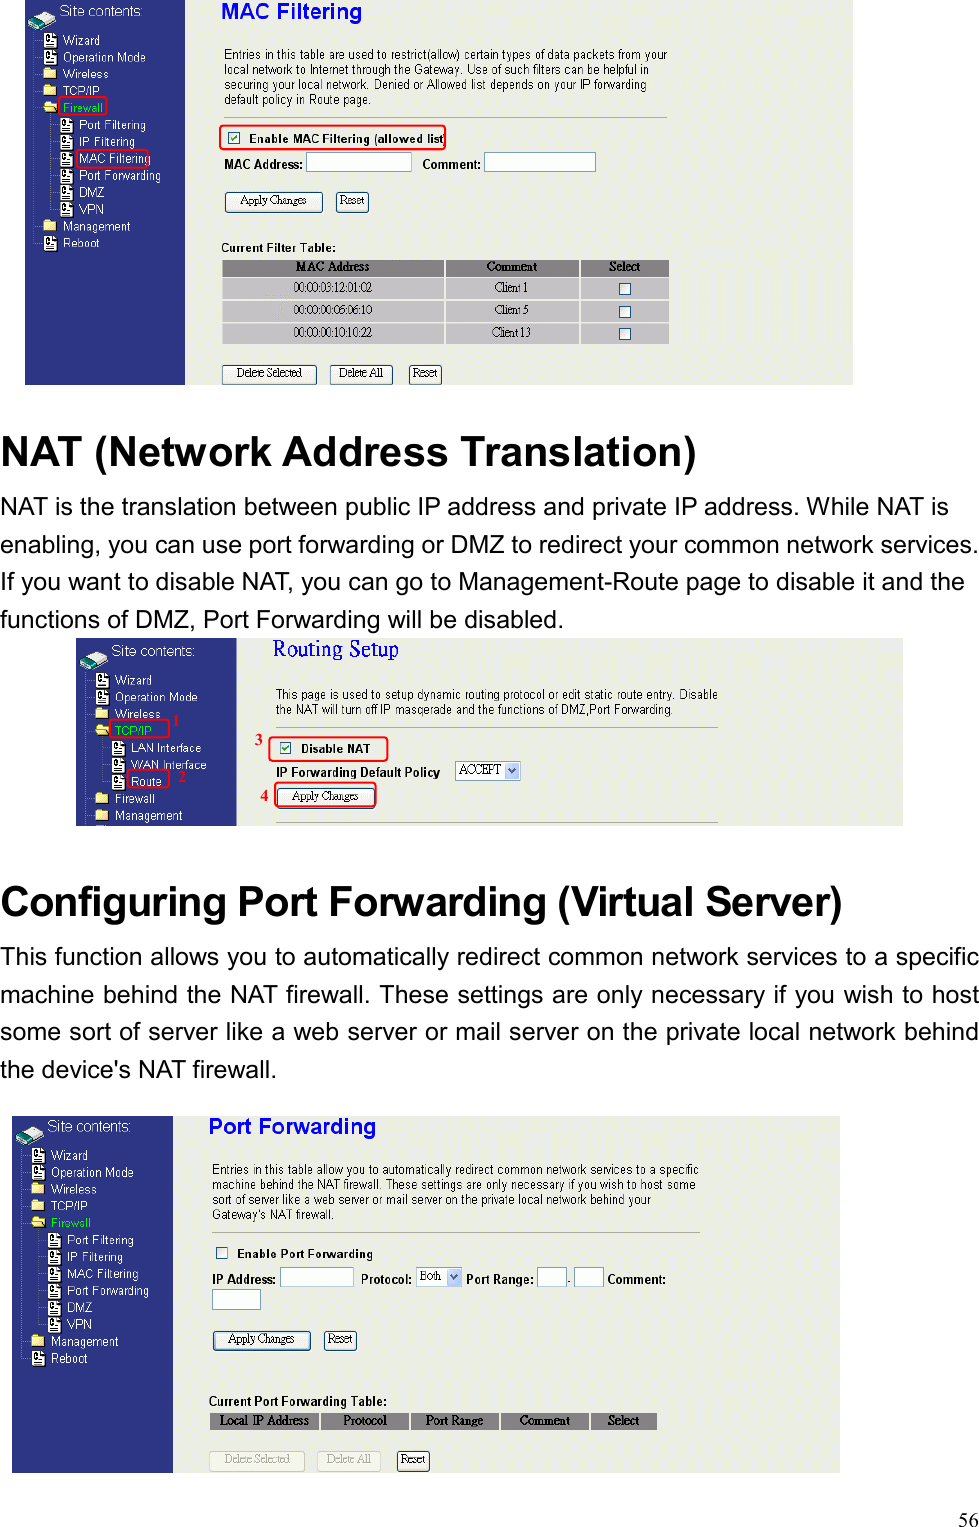  56  NAT (Network Address Translation)     NAT is the translation between public IP address and private IP address. While NAT is enabling, you can use port forwarding or DMZ to redirect your common network services. If you want to disable NAT, you can go to Management-Route page to disable it and the functions of DMZ, Port Forwarding will be disabled.      Configuring Port Forwarding (Virtual Server) This function allows you to automatically redirect common network services to a specific machine behind the NAT firewall. These settings are only necessary if you wish to host some sort of server like a web server or mail server on the private local network behind the device&apos;s NAT firewall.  1234